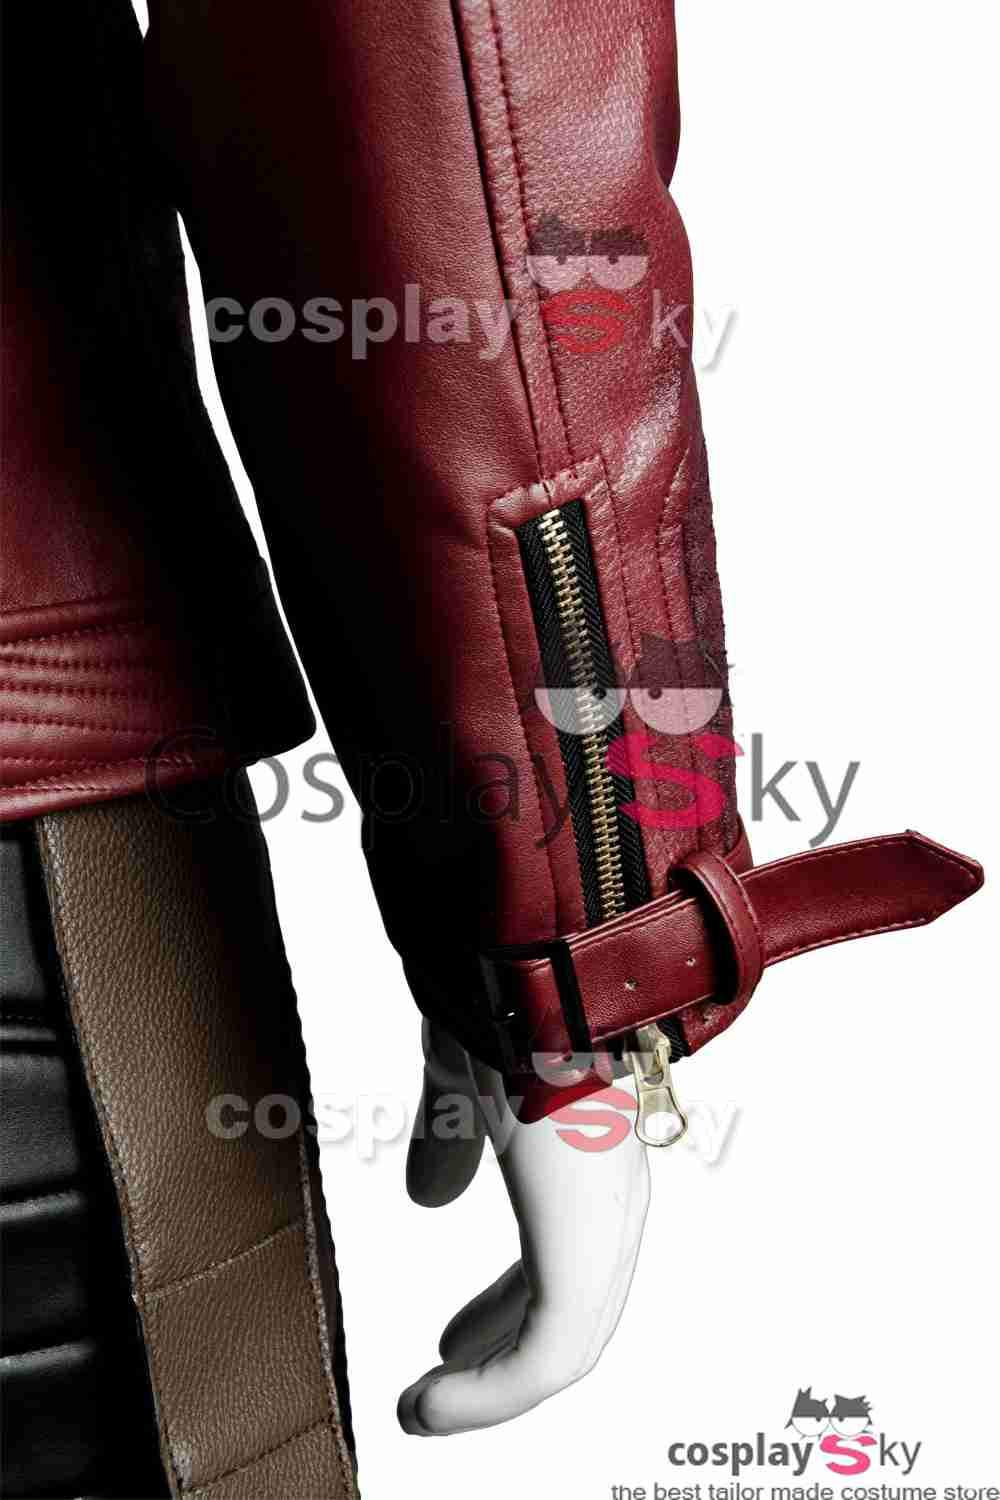 Guardians of the Galaxy 2 Peter Jason Quill Starlord Cosplay Costume